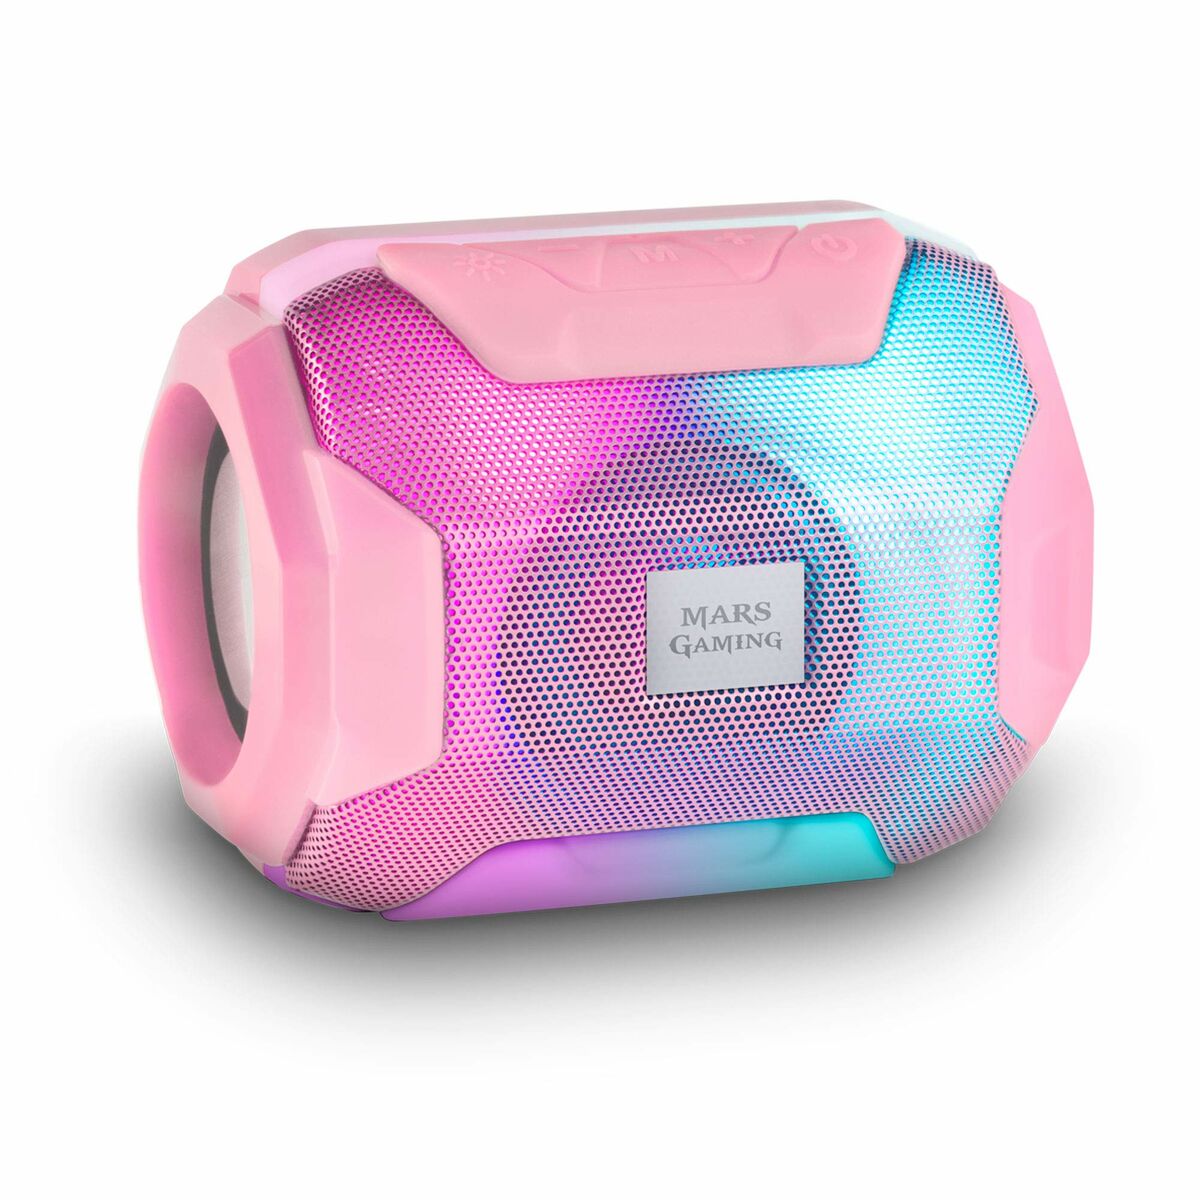 Bluetooth Speakers Mars Gaming MSBAXP RGB 2100 W, Mars Gaming, Electronics, Radio communication, bluetooth-speakers-mars-gaming-msbaxp-rgb-2100-w, Brand_Mars Gaming, category-reference-2609, category-reference-2637, category-reference-2882, category-reference-t-16442, category-reference-t-16443, category-reference-t-16444, category-reference-t-19653, cinema and television, Condition_NEW, entertainment, music, Price_20 - 50, RiotNook